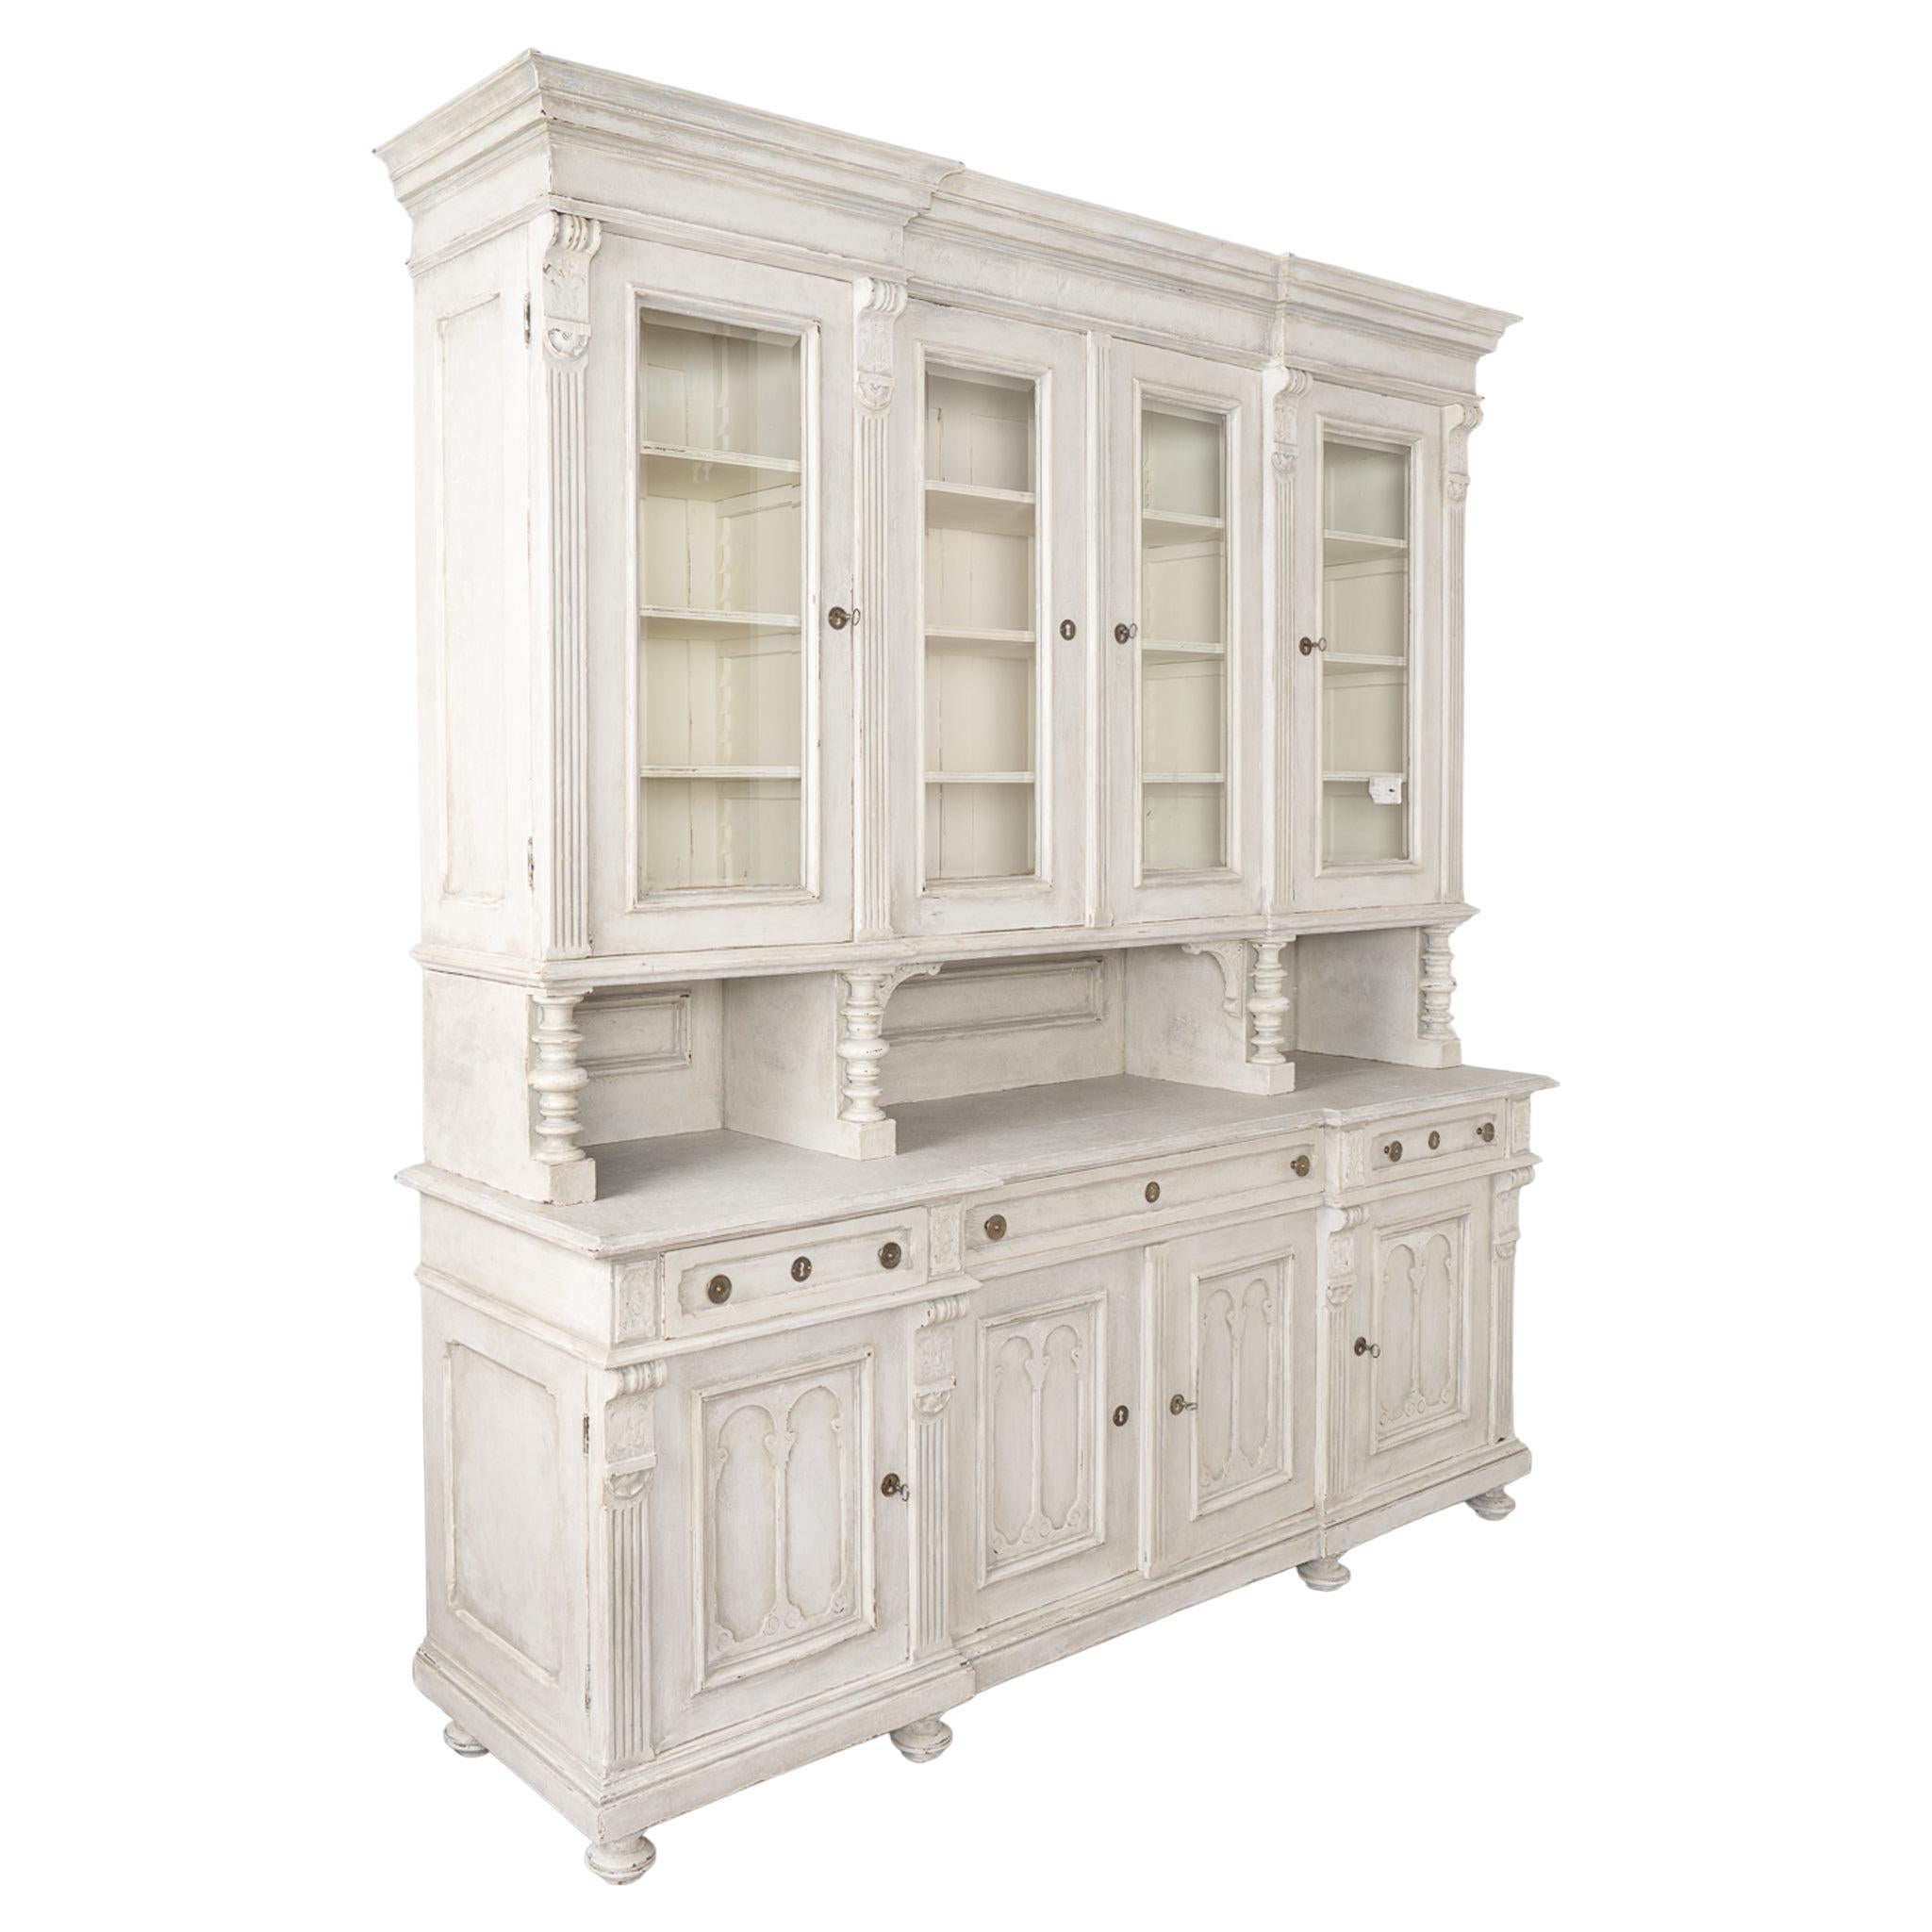 French Country Large Display Cabinet Bookcase Painted White, circa 1900